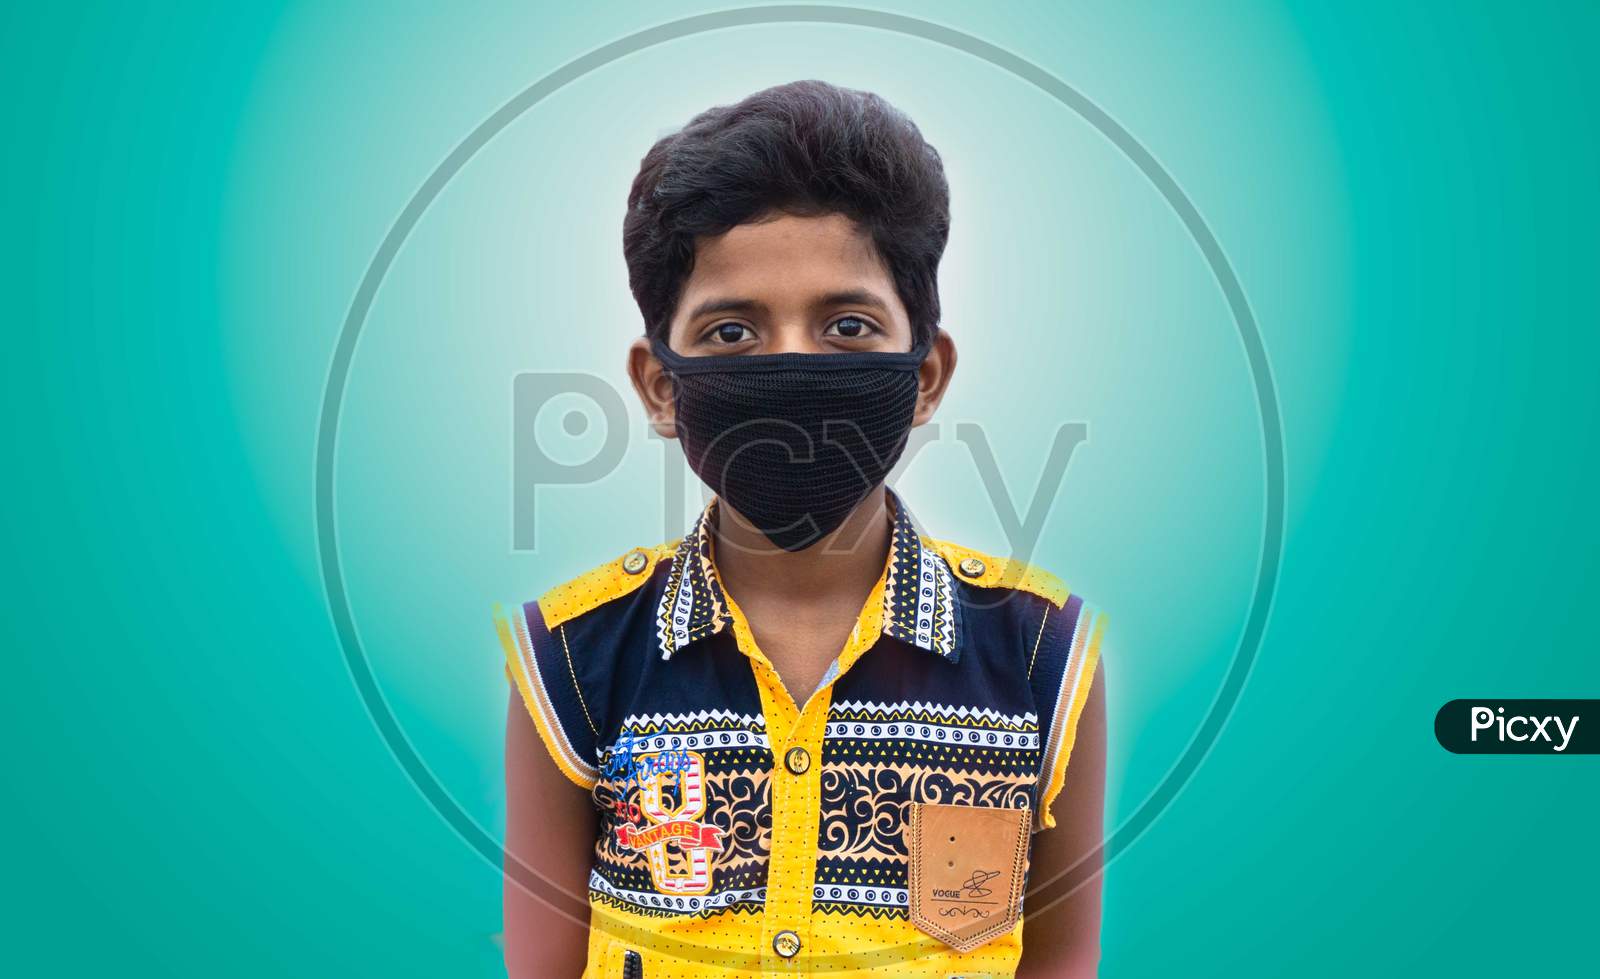 KID WEARING MASK DURING THE COVID -19 PANDEMIC